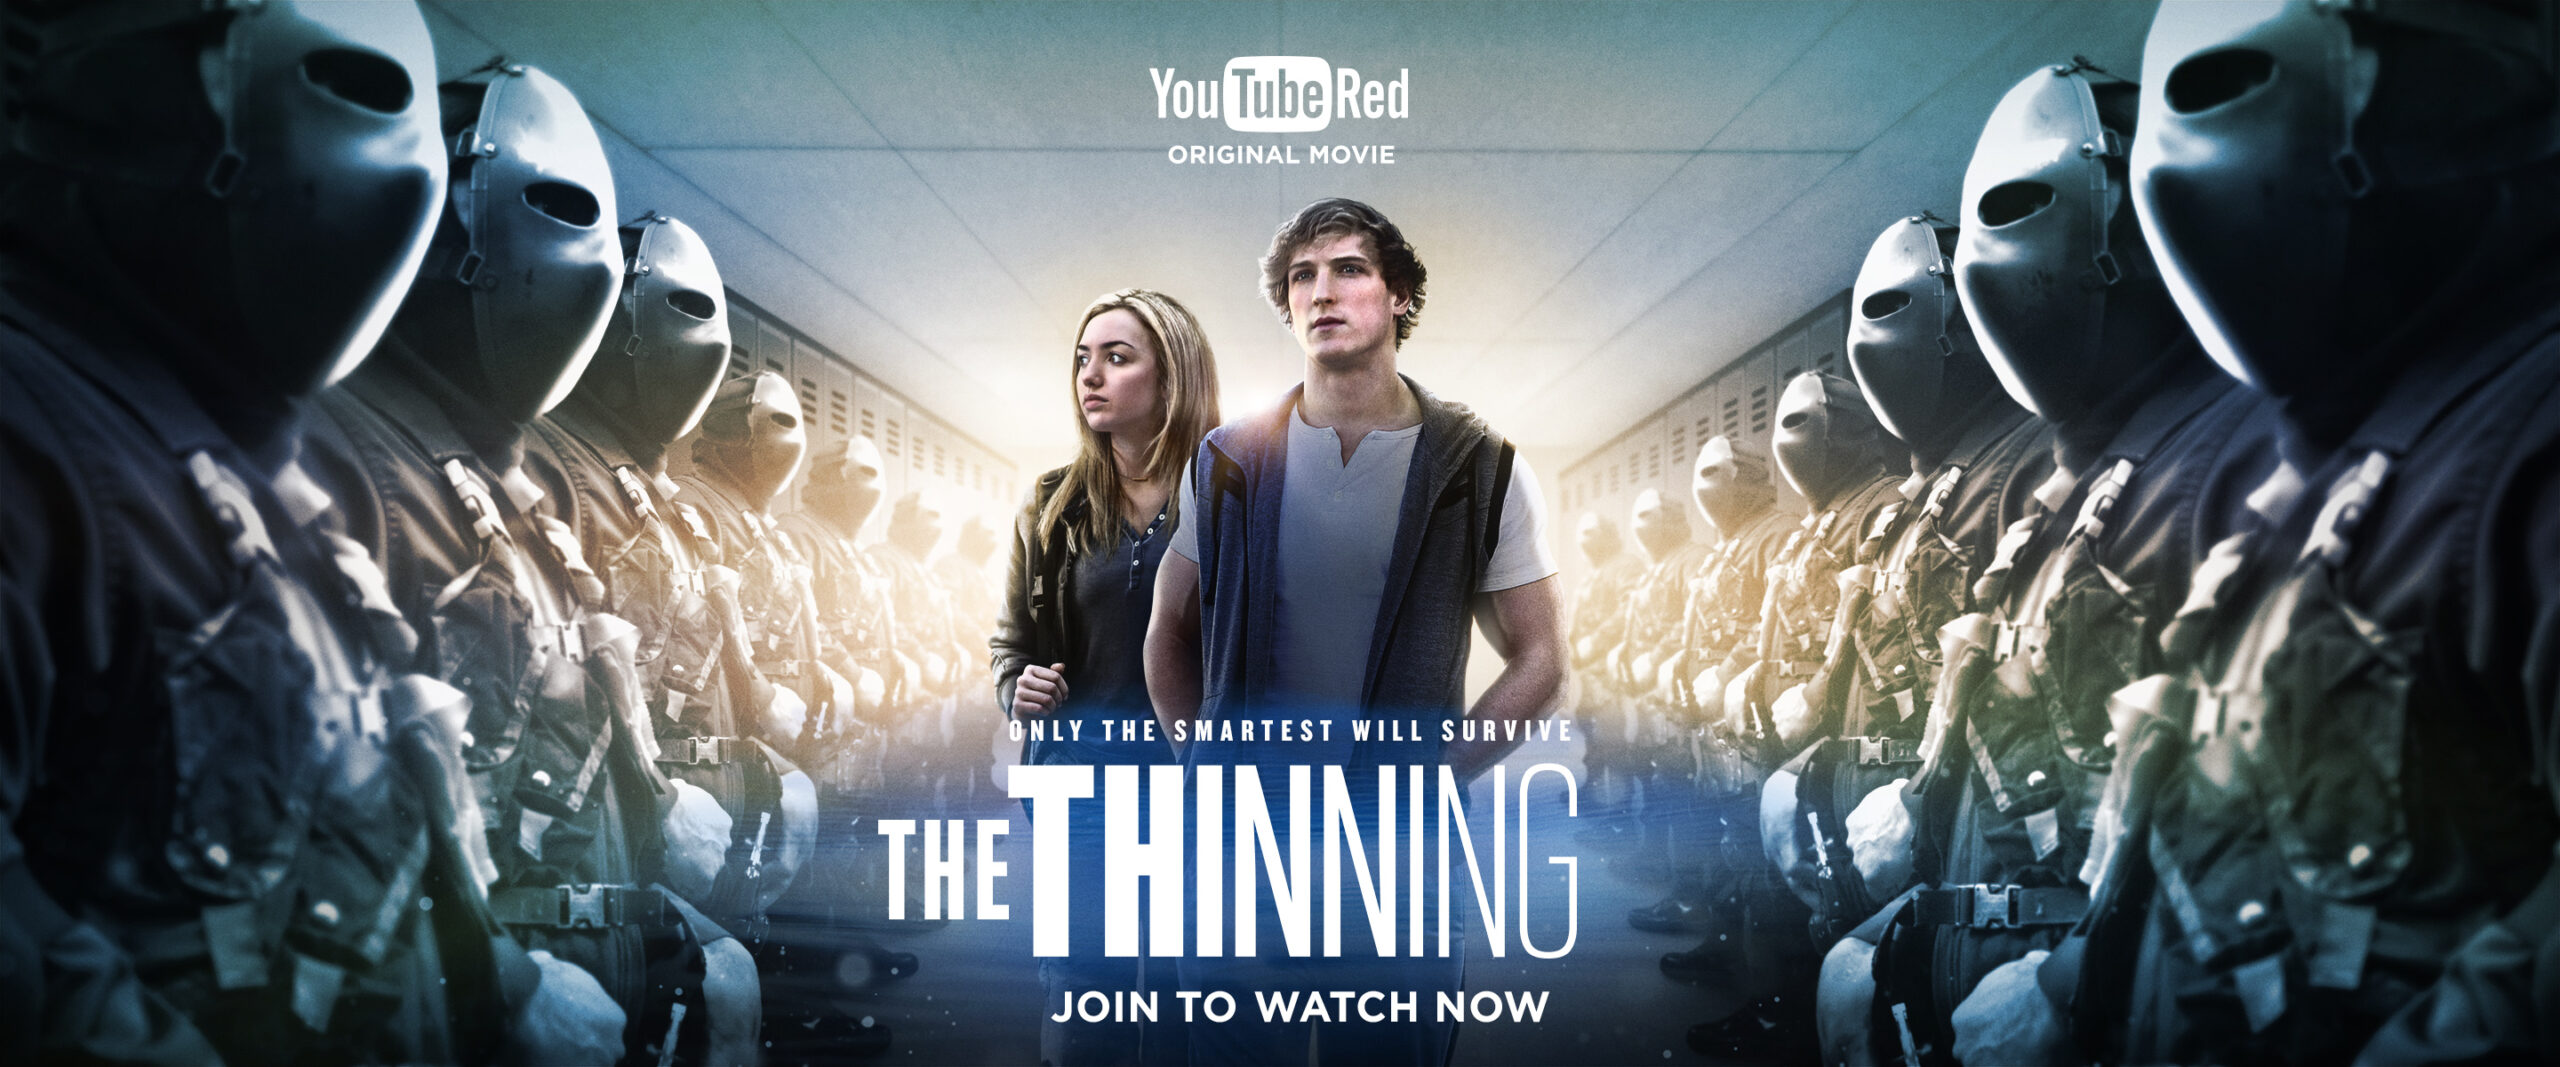 The Thinning 3 Release Date